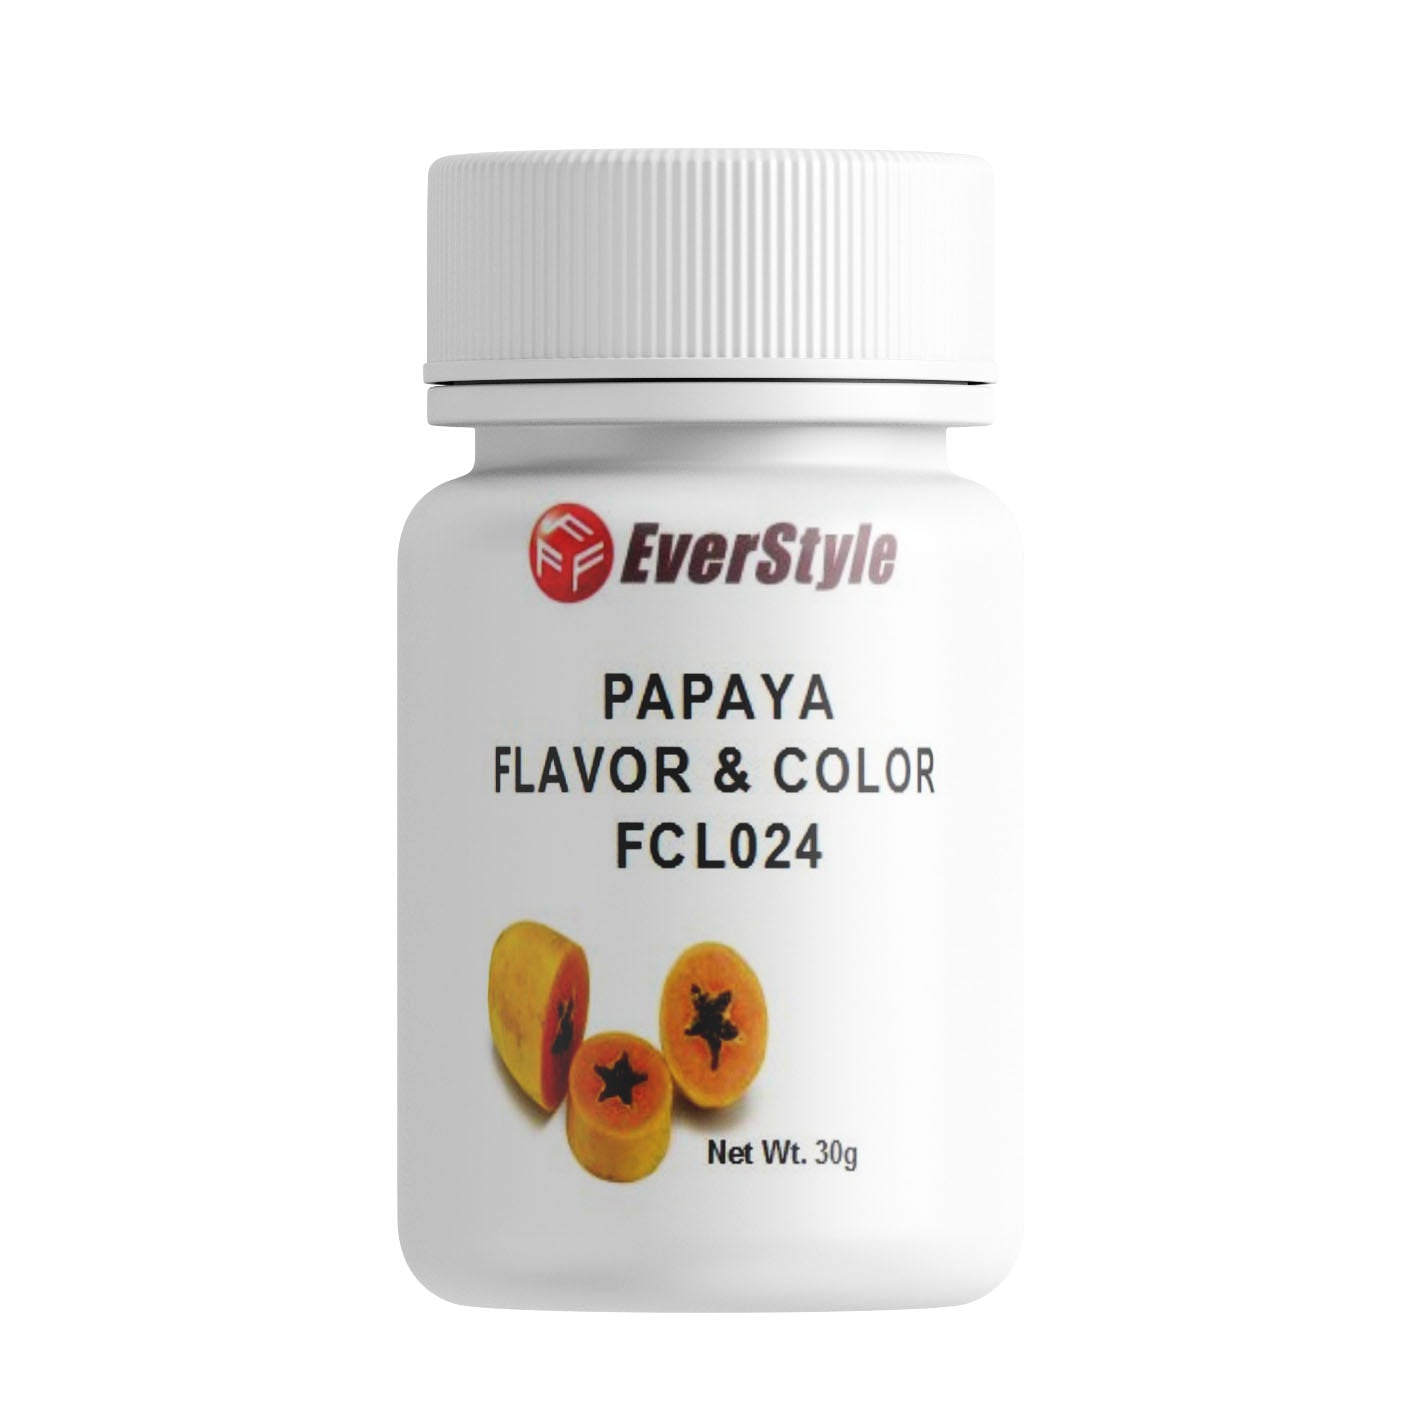 Everstyle Papaya Flavor and Color 30g (FCL024)